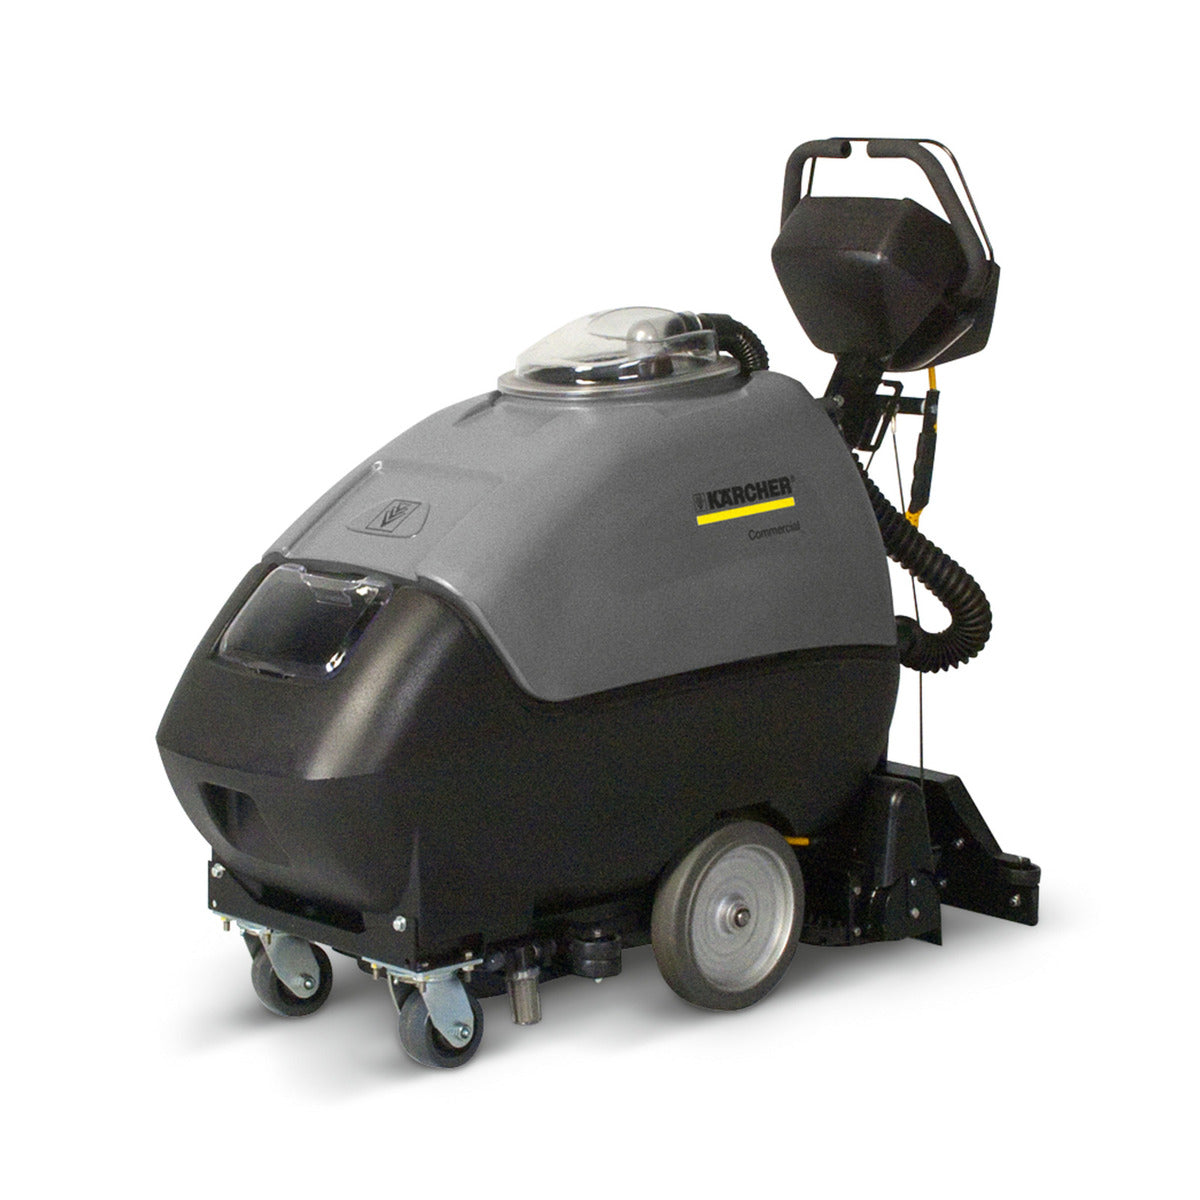 Karcher BRC 46/76 W, Carpet Extractor, 20 Gallon, 18", Self Contained, Walk Behind